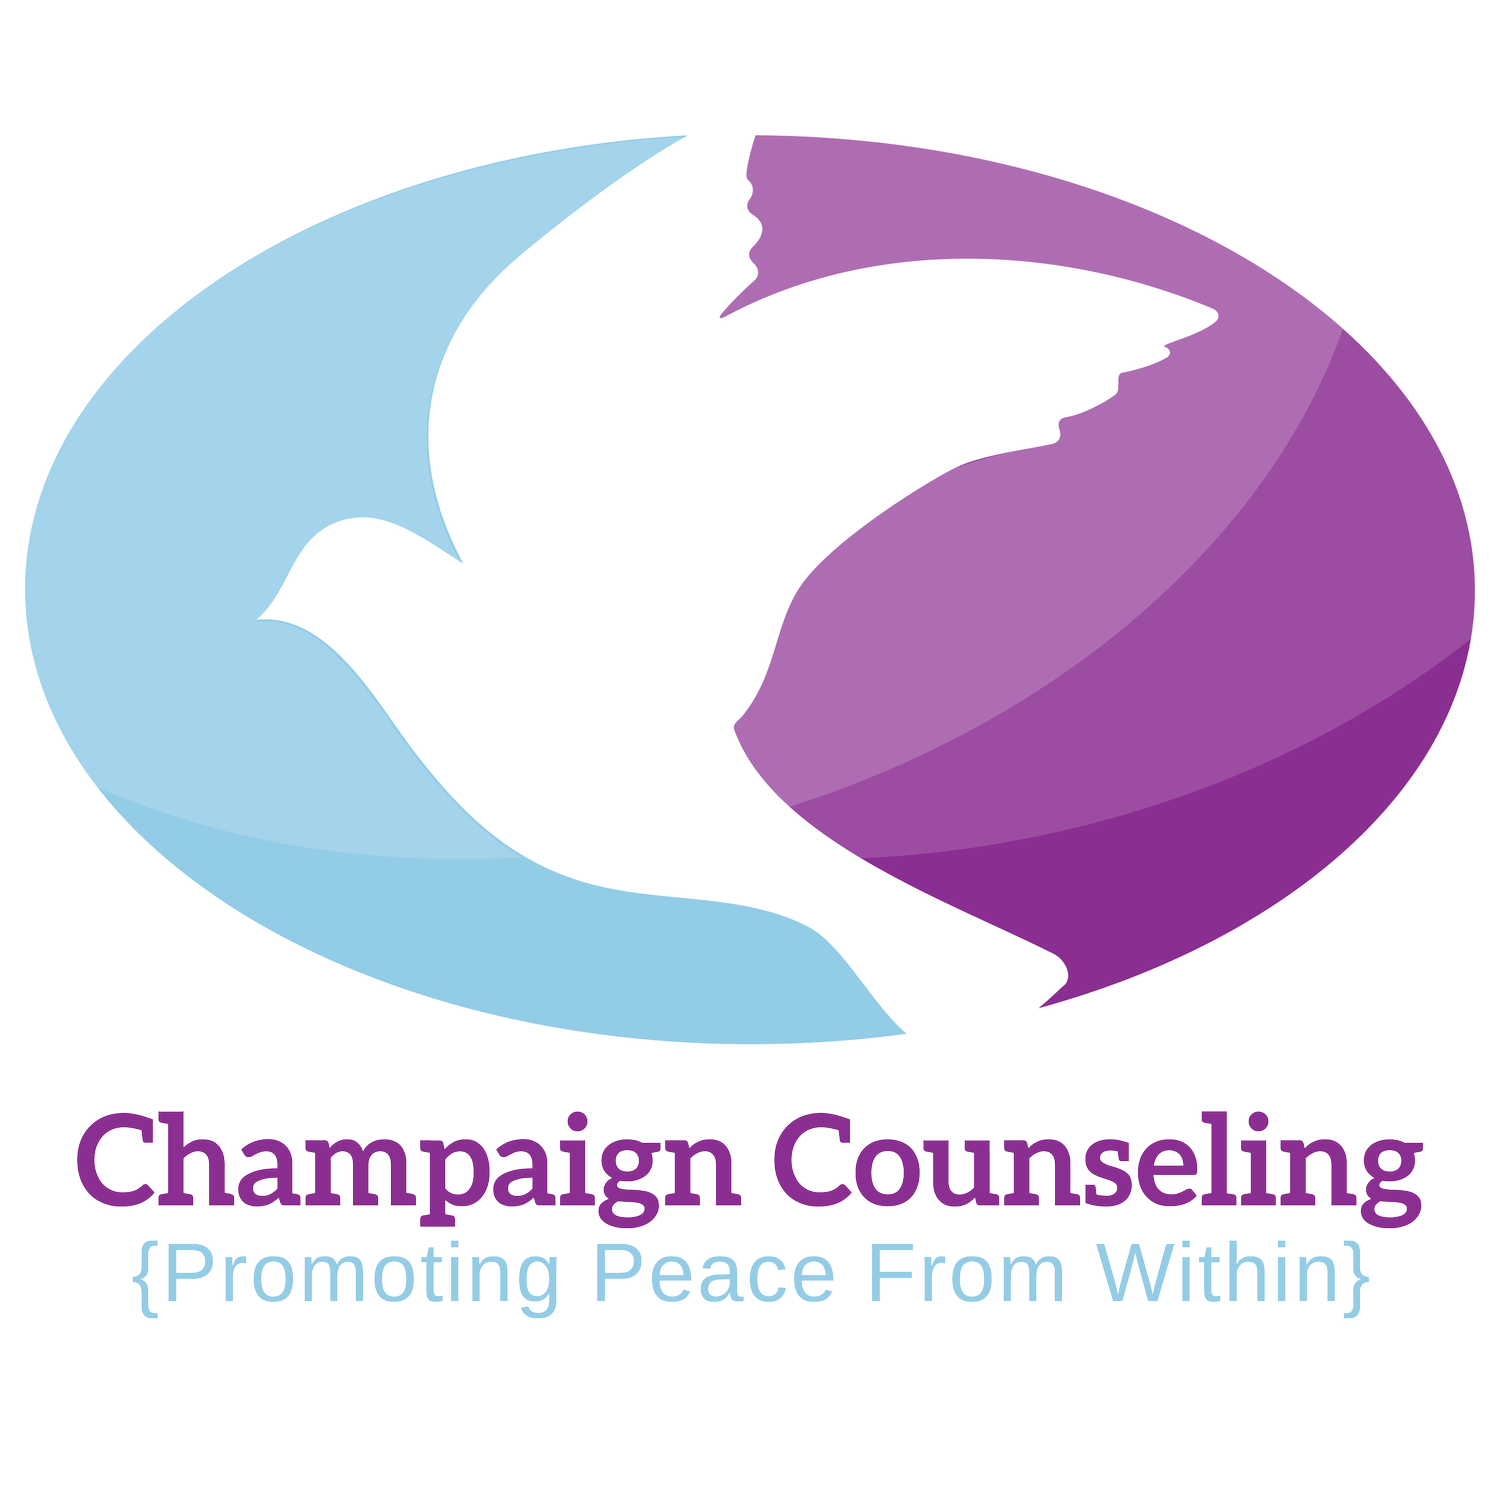 Champaign Counseling